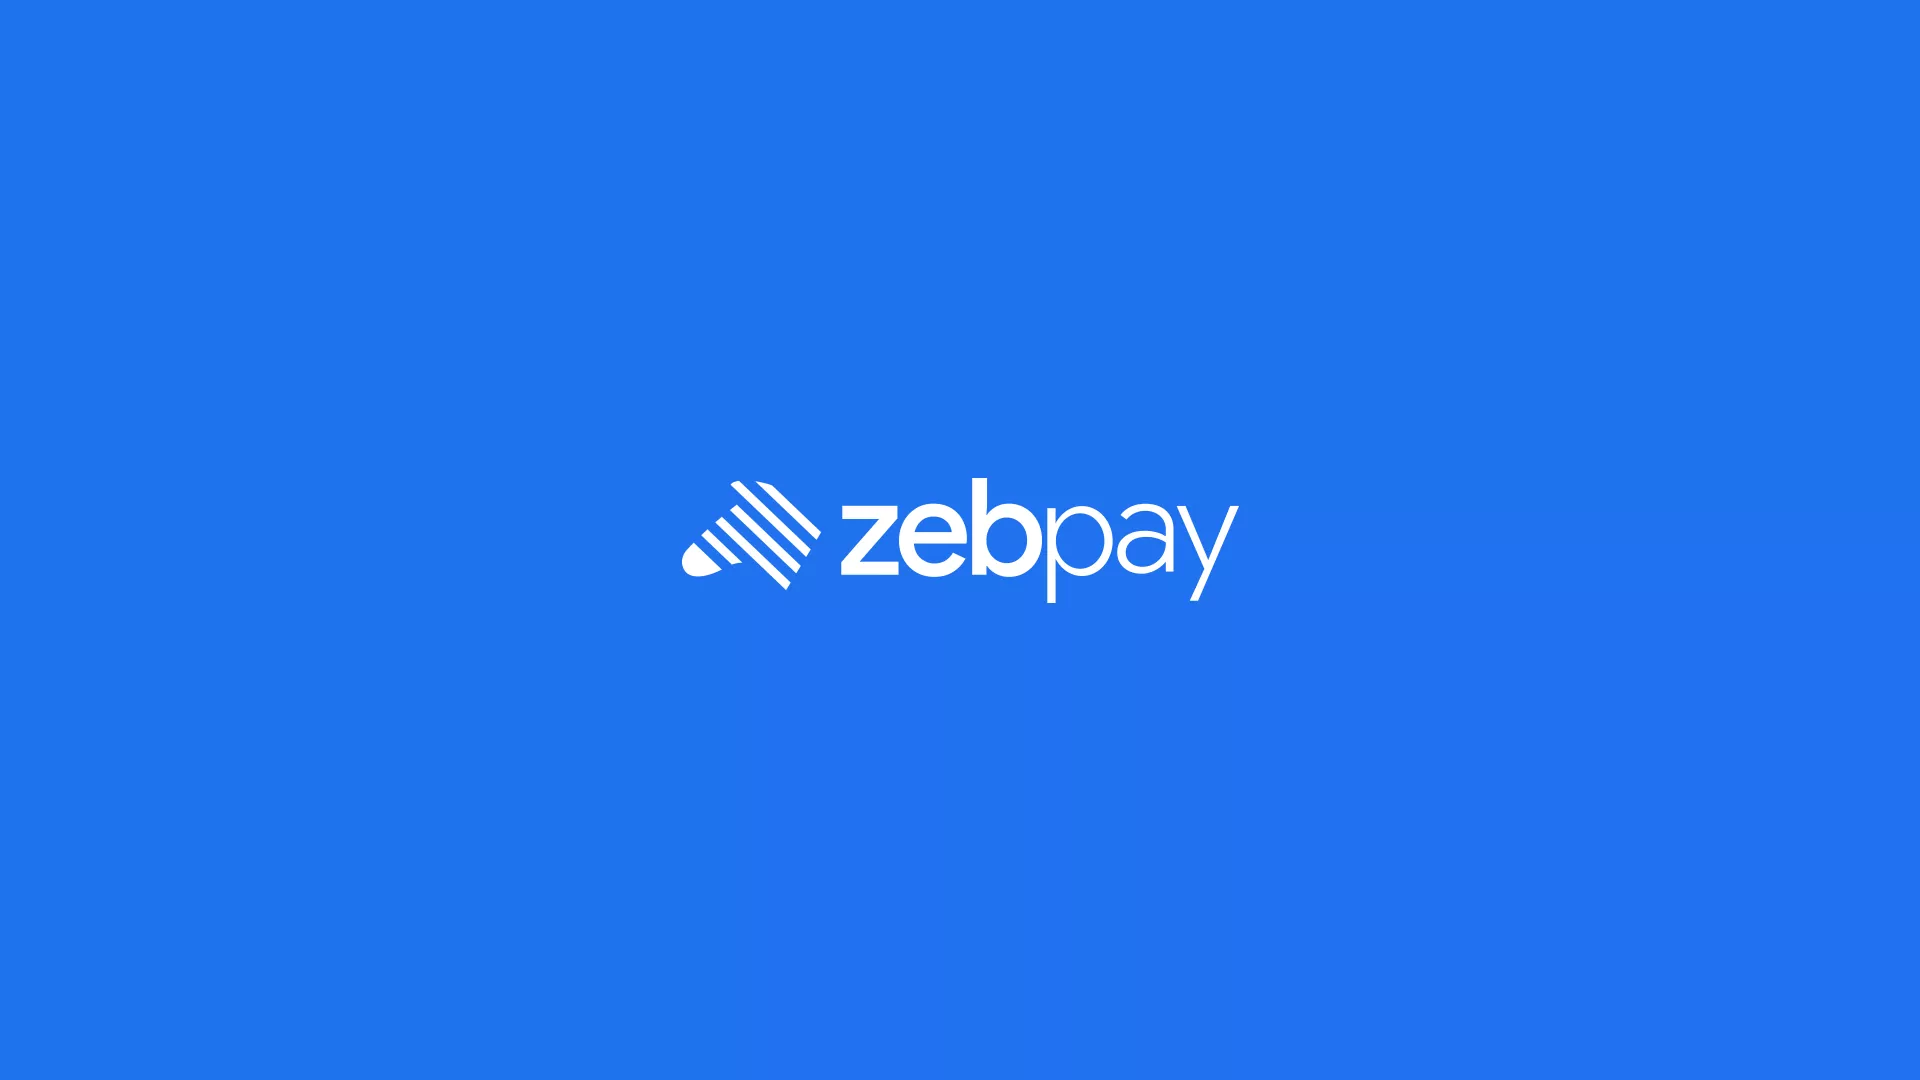 How to sell crypto on Zebpay